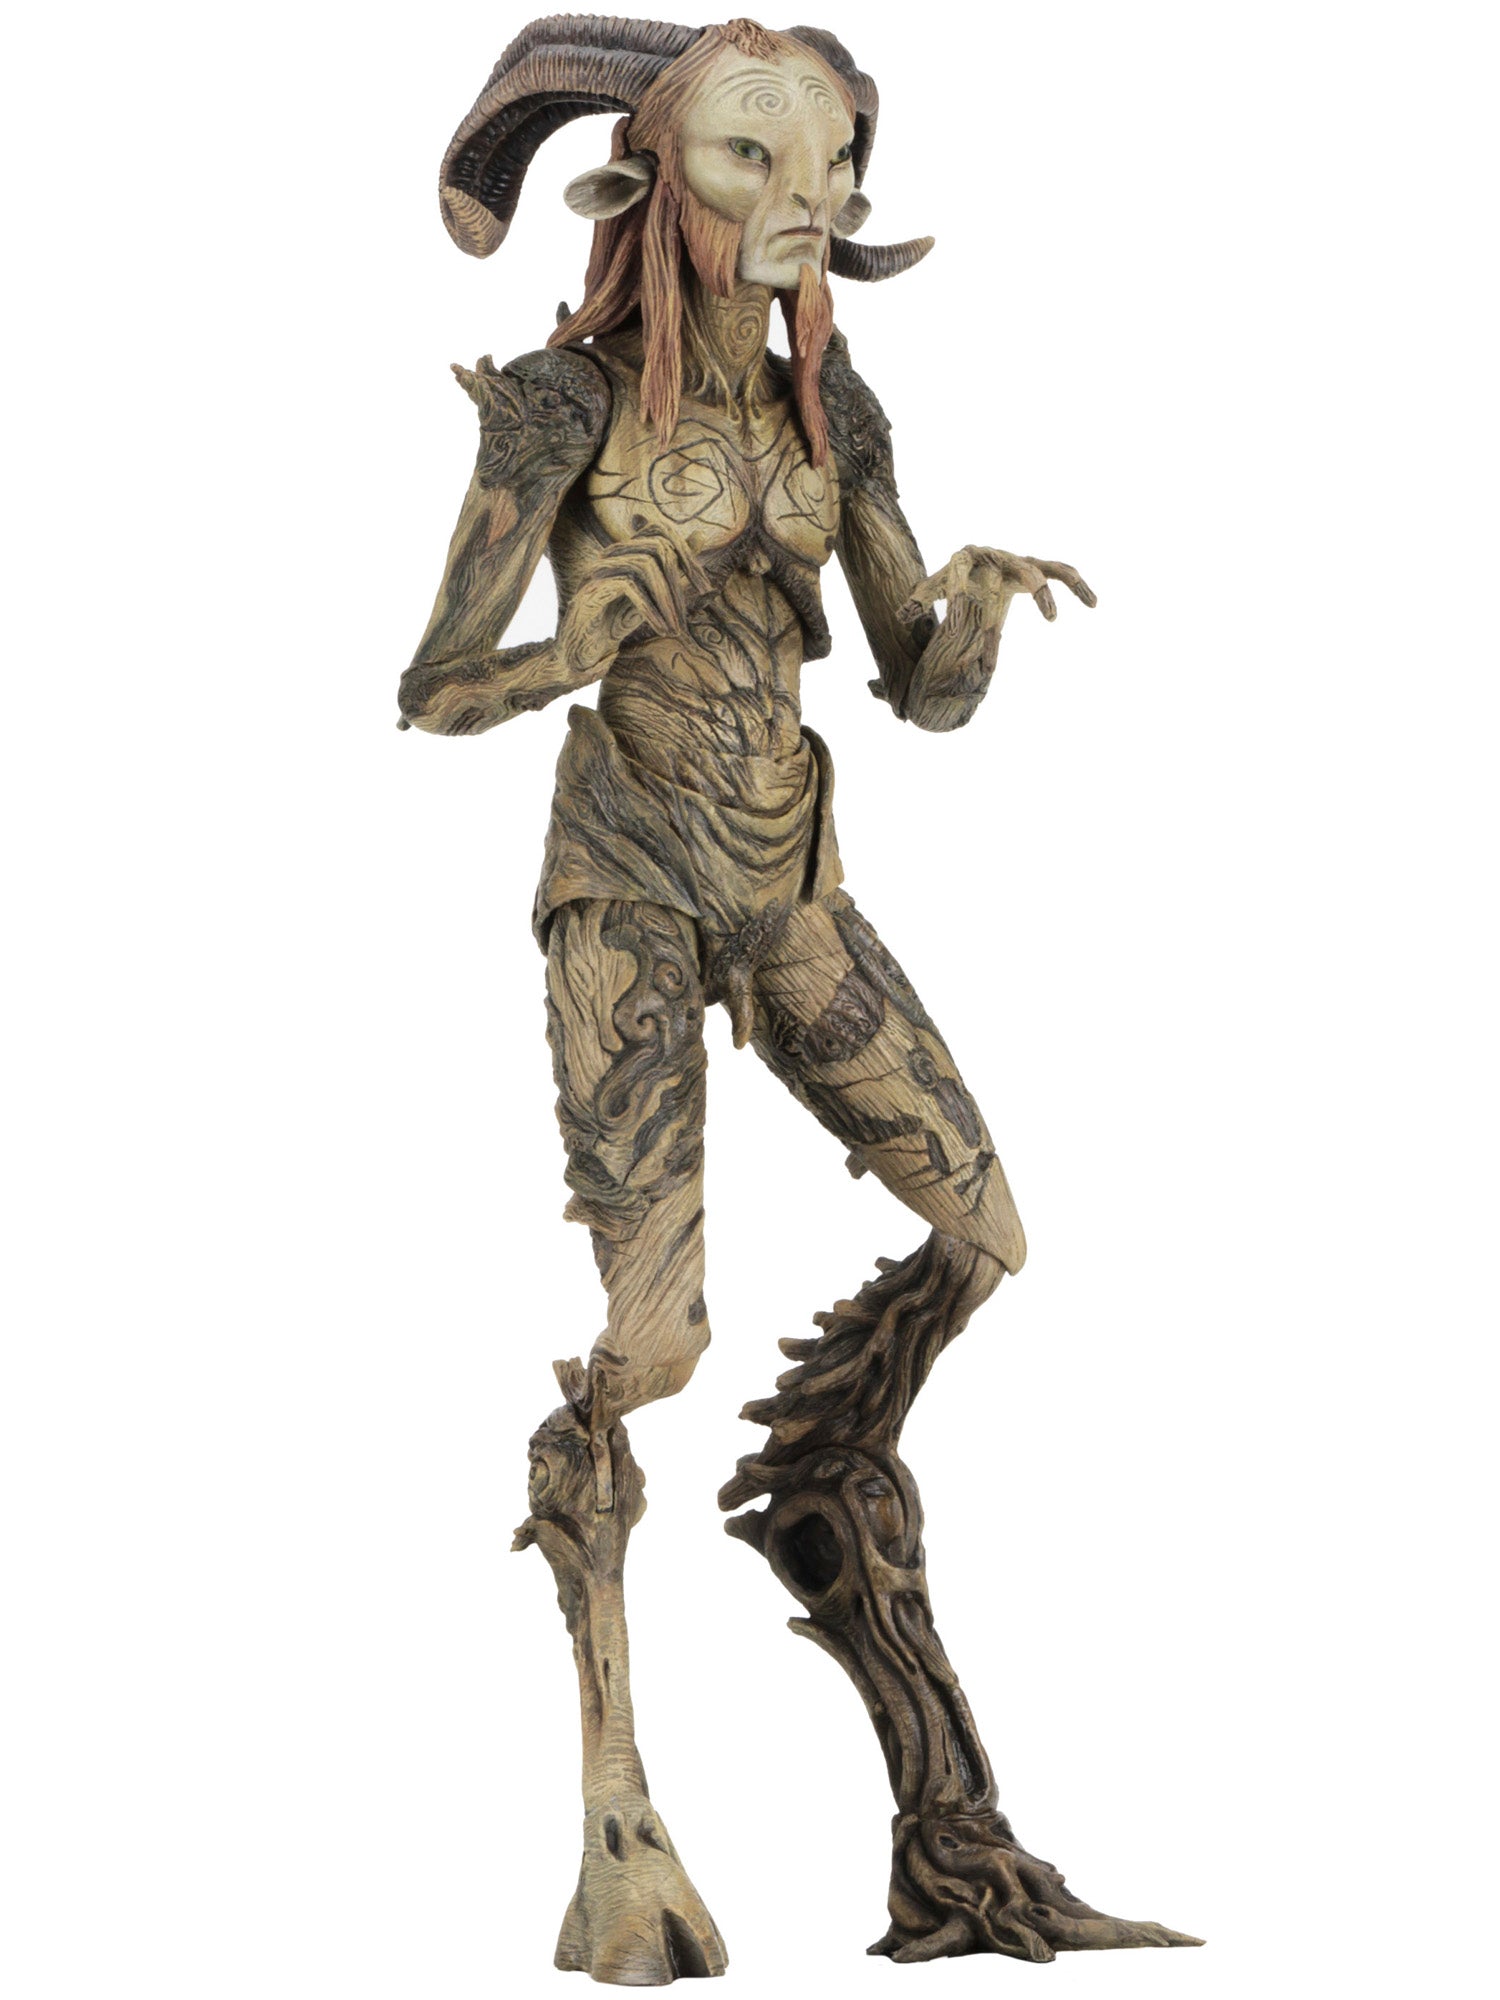 NECA - GDT Collection - 7" Scale Figure - Faun - costumes.com